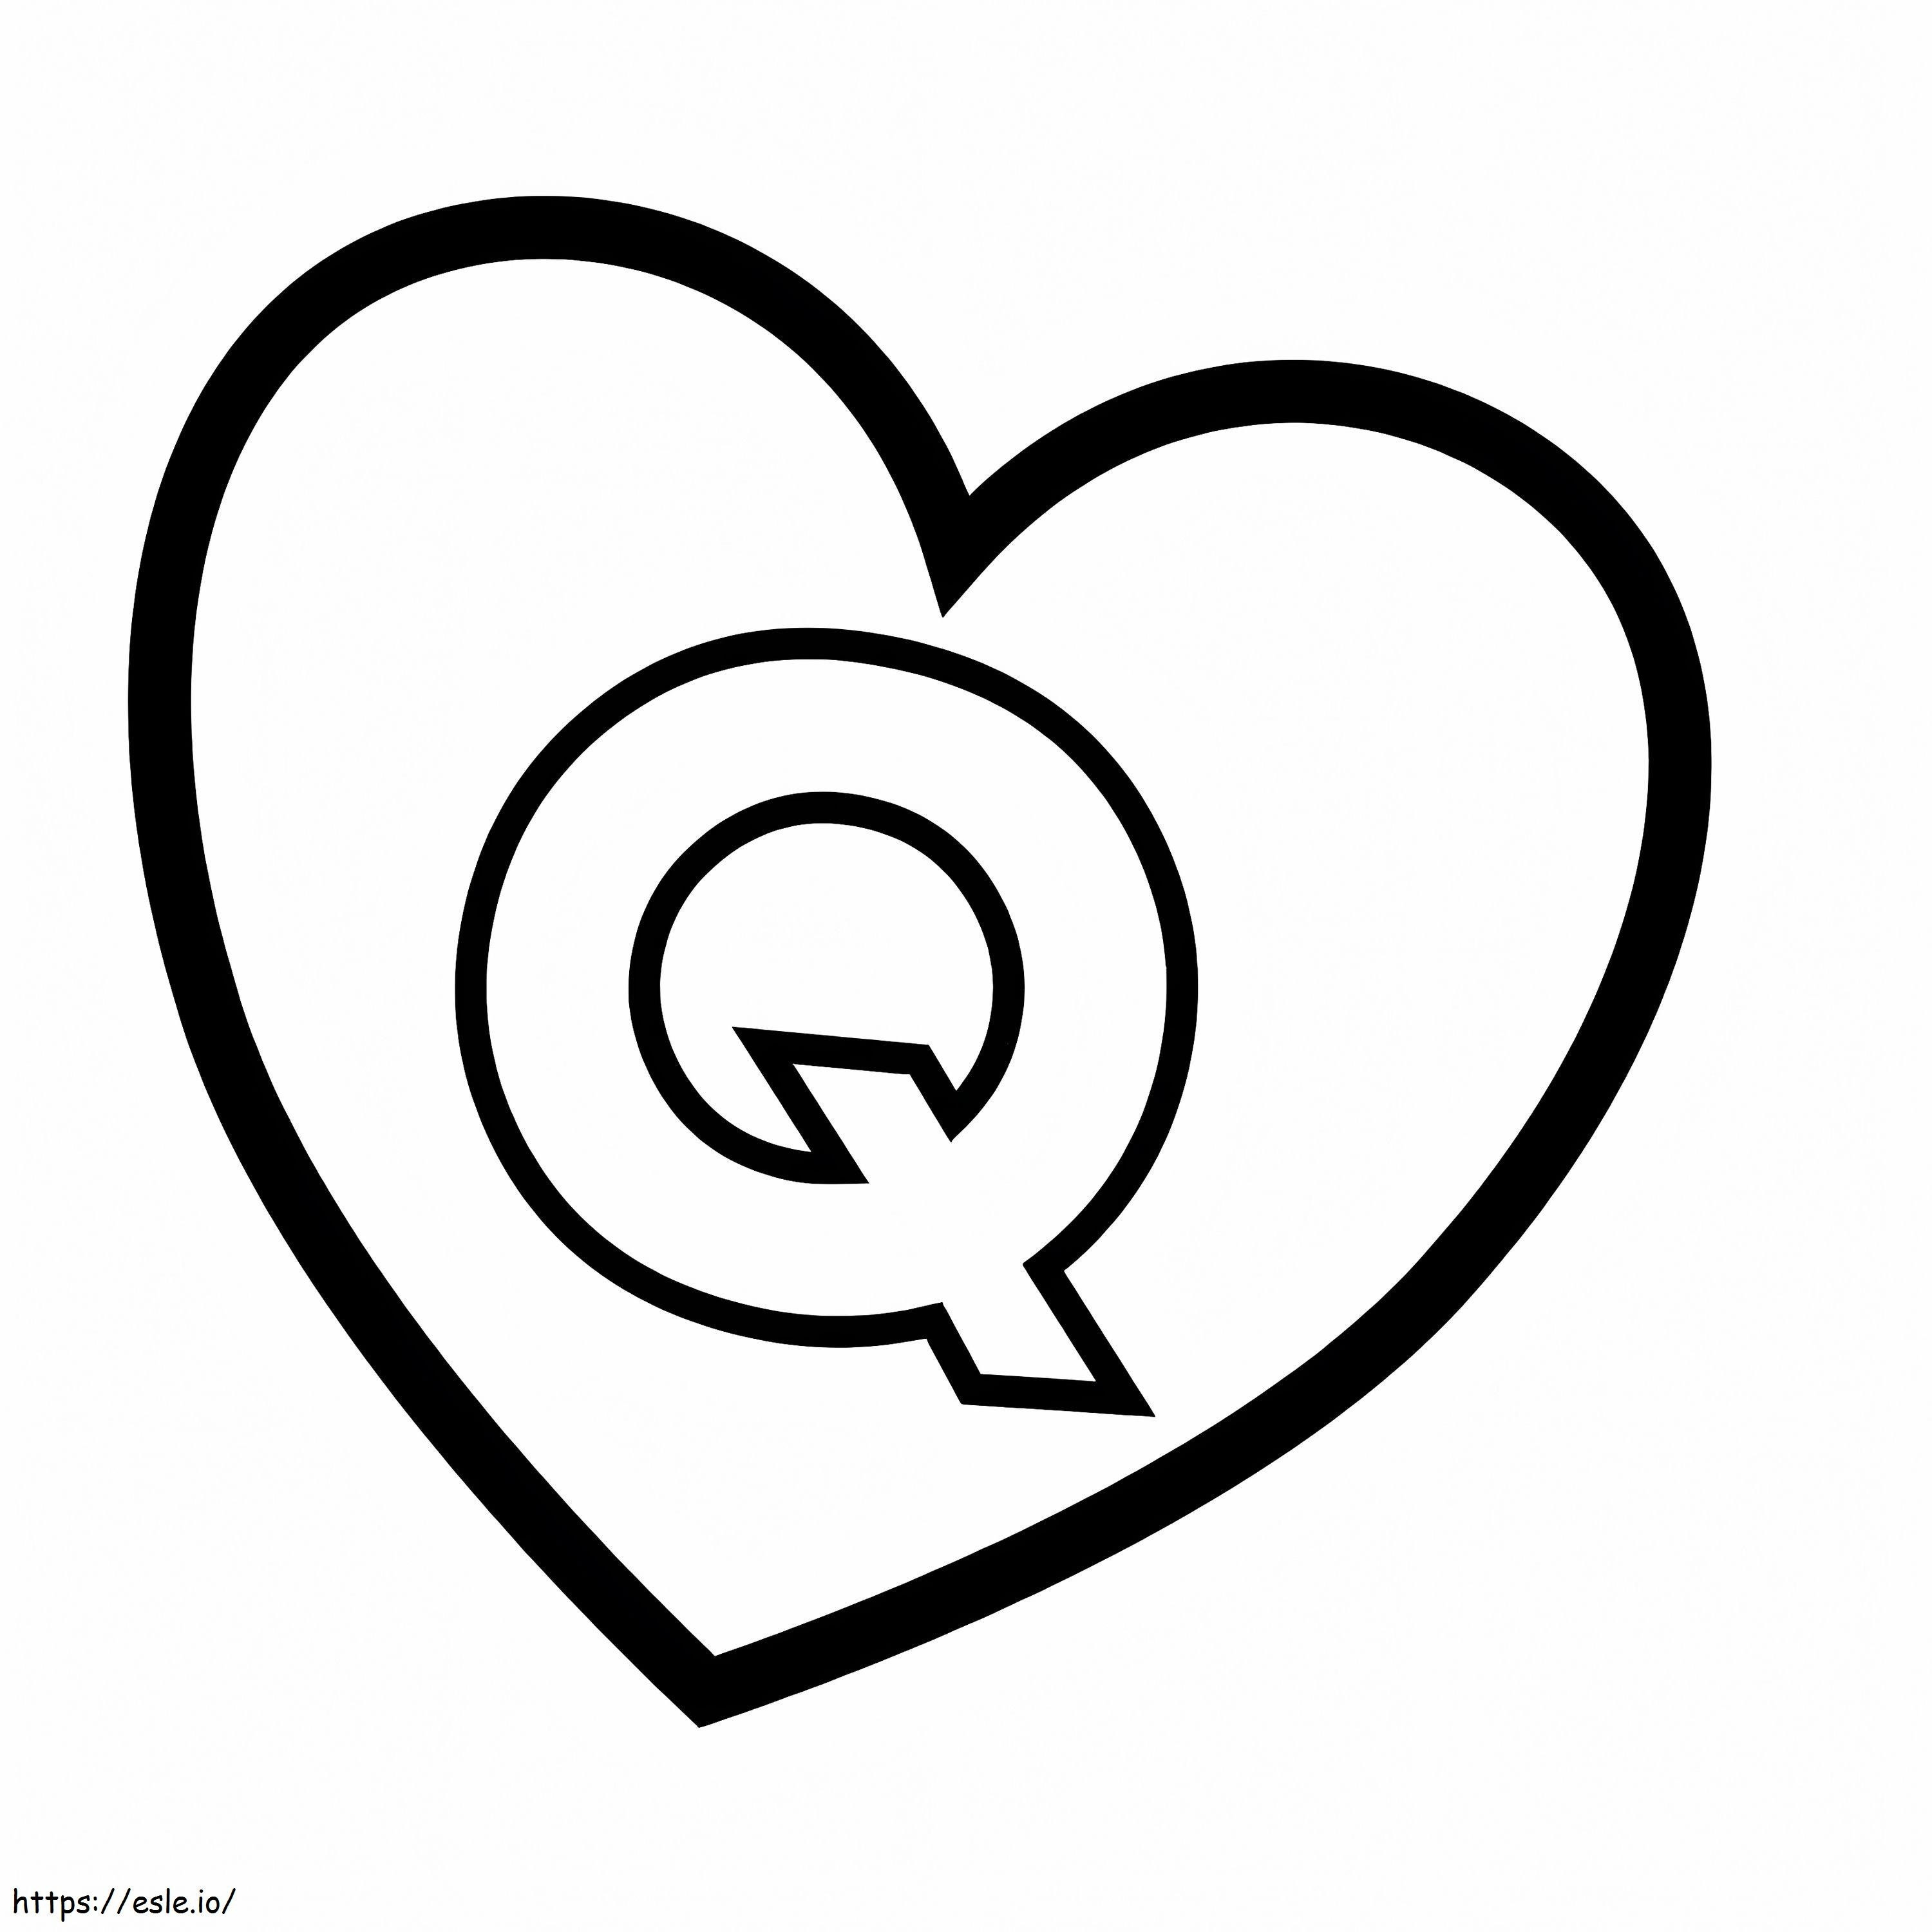 Letter Q 1 coloring page